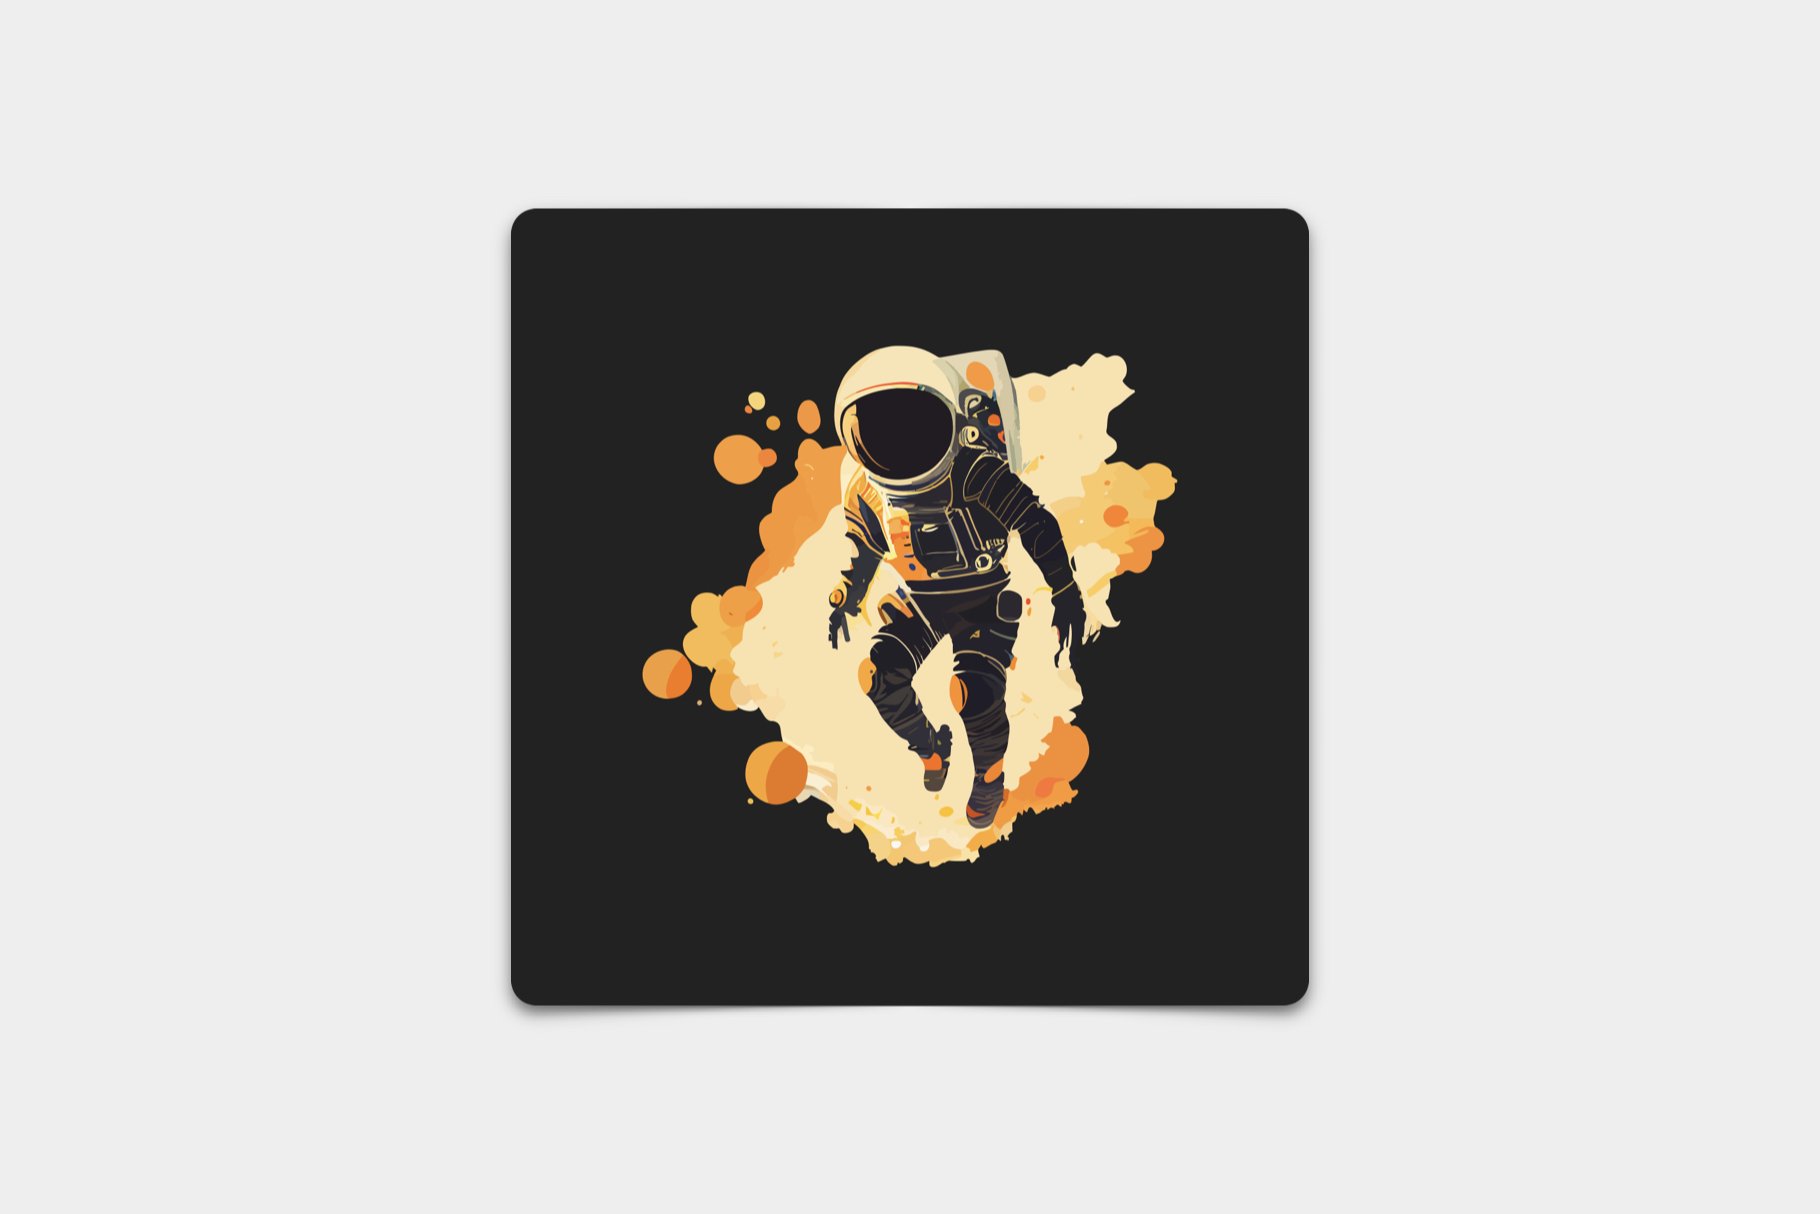 Astronaut in space cover image.